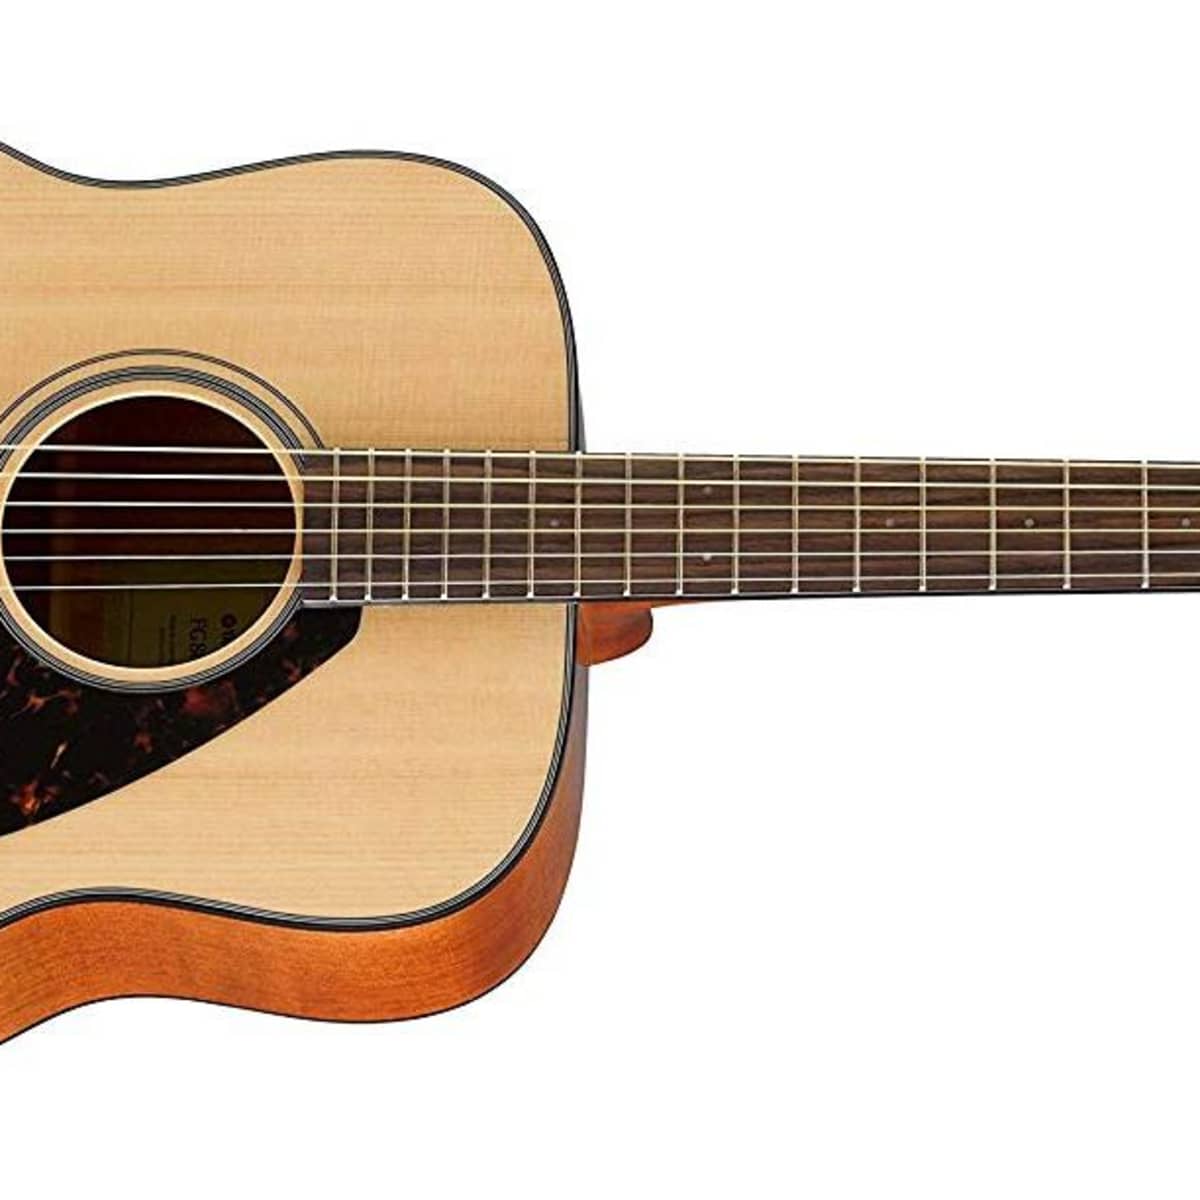 Best Yamaha Acoustic Guitars for Beginners - Spinditty